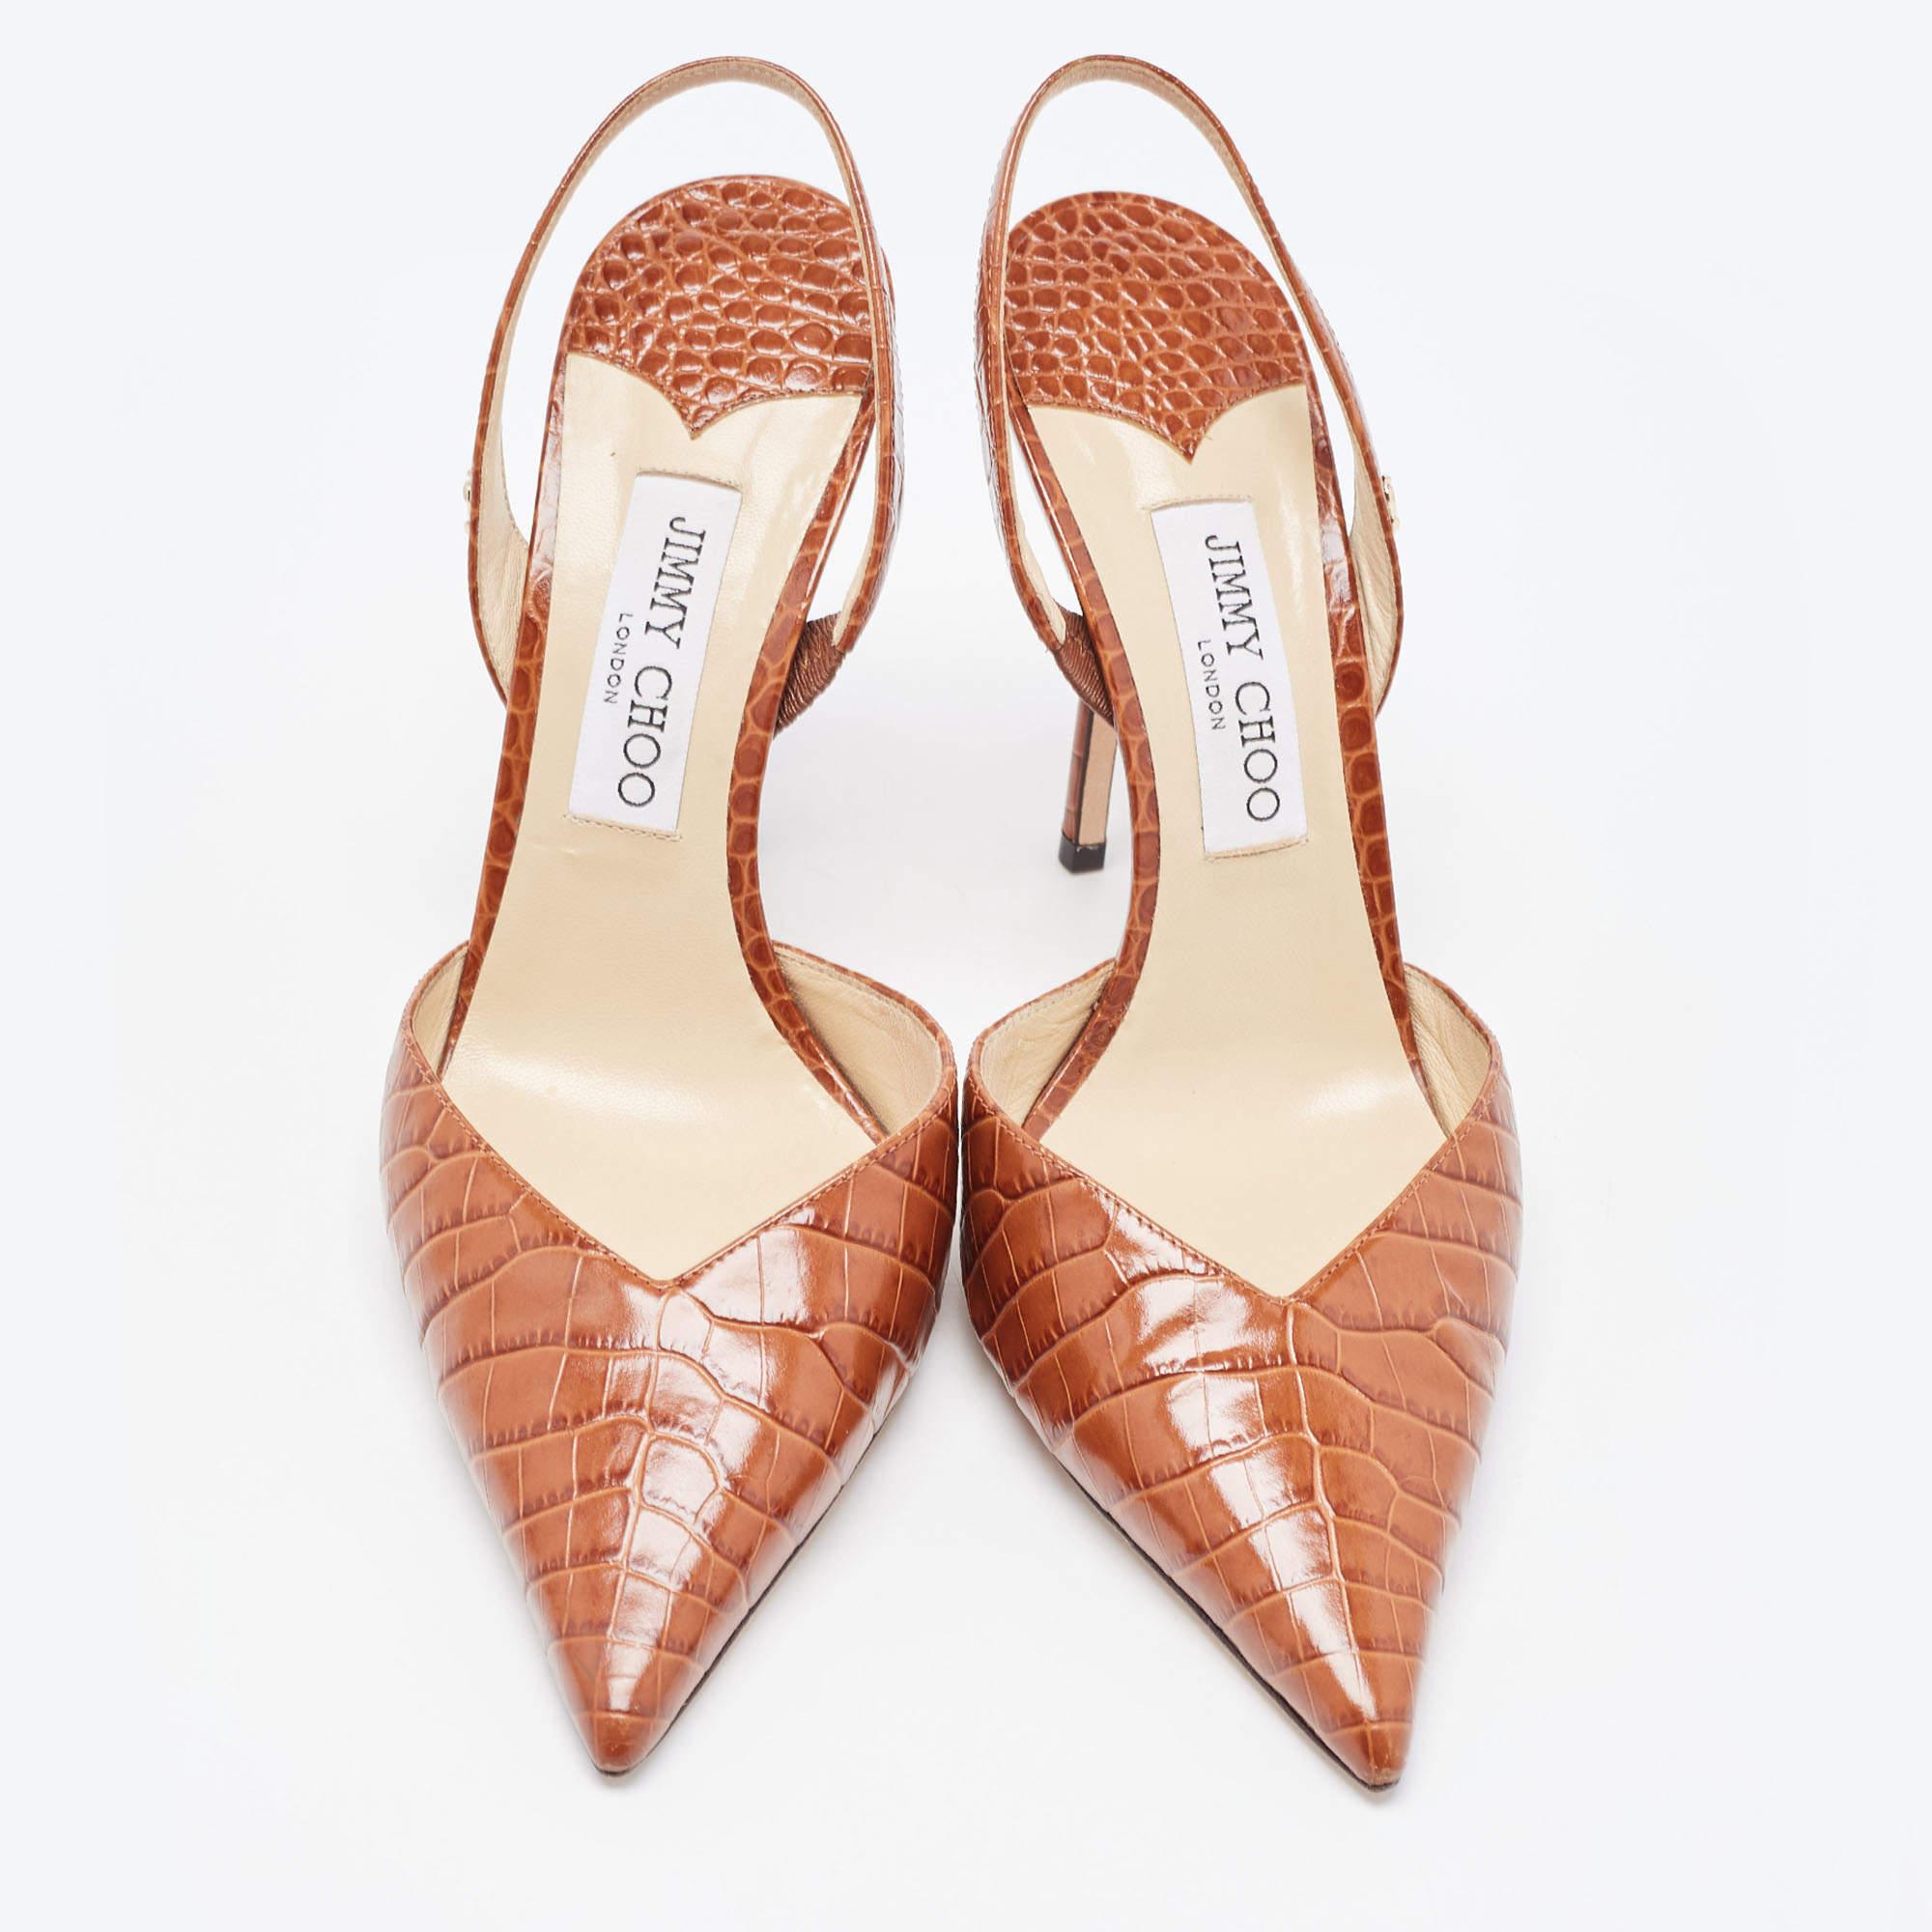 Exhibit an elegant style with this pair of pumps. These elegant shoes are crafted from quality materials. They are set on durable soles and sleek heels.

Includes: Original Dustbag, Original Box, Info Booklet

